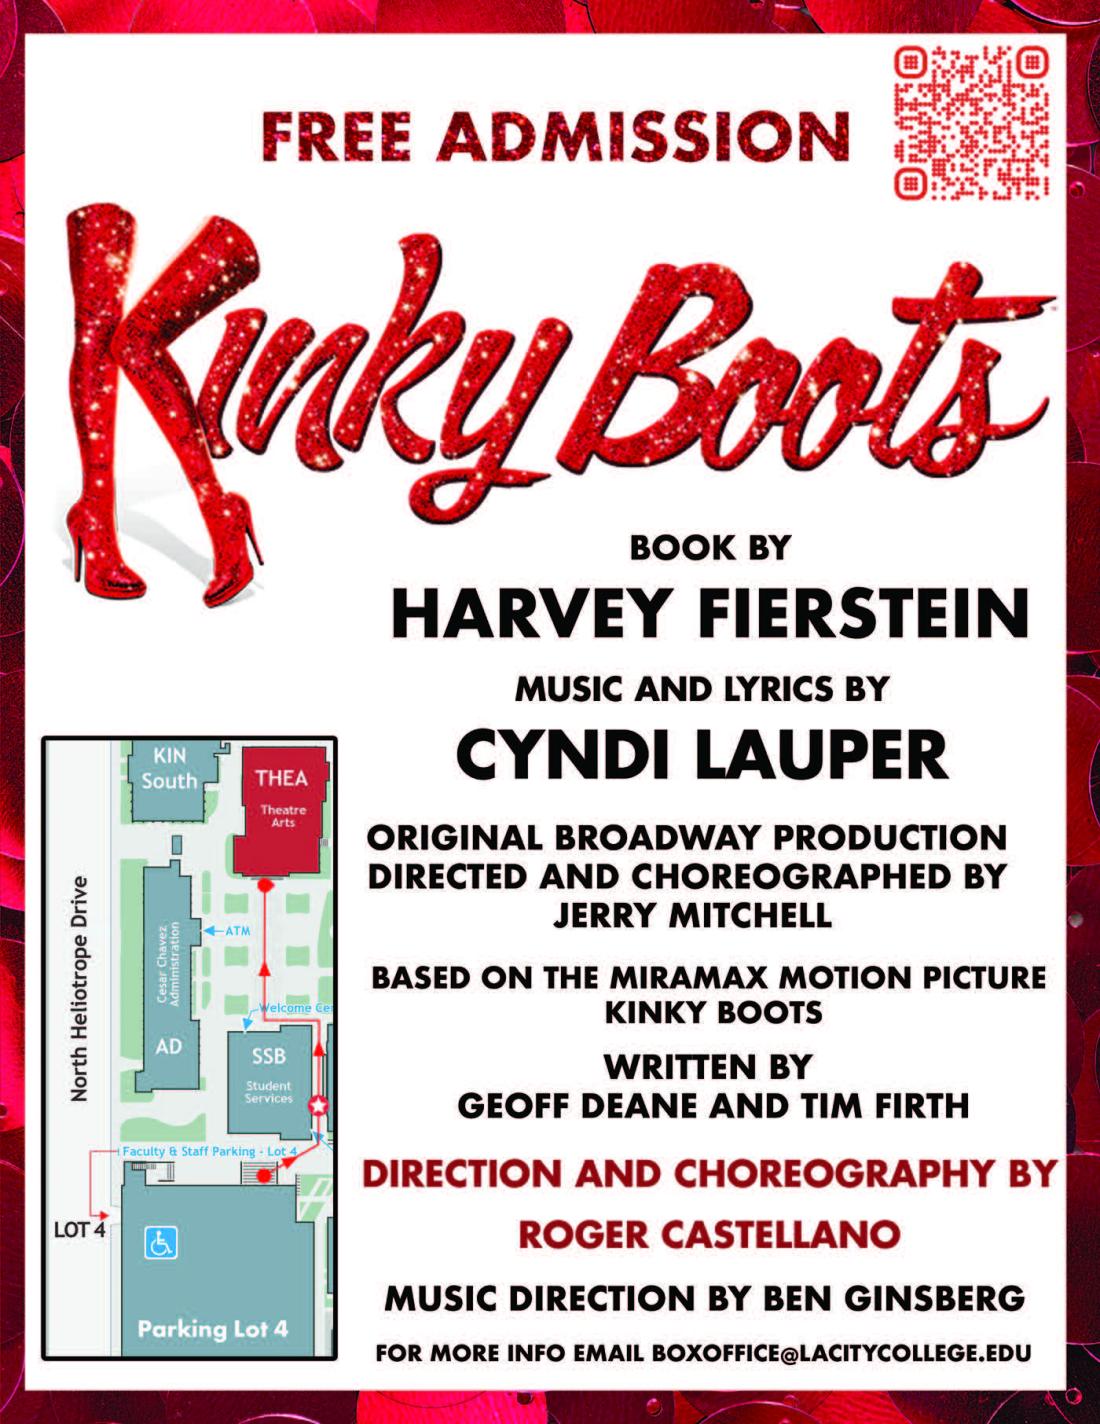 kinky boots poster info